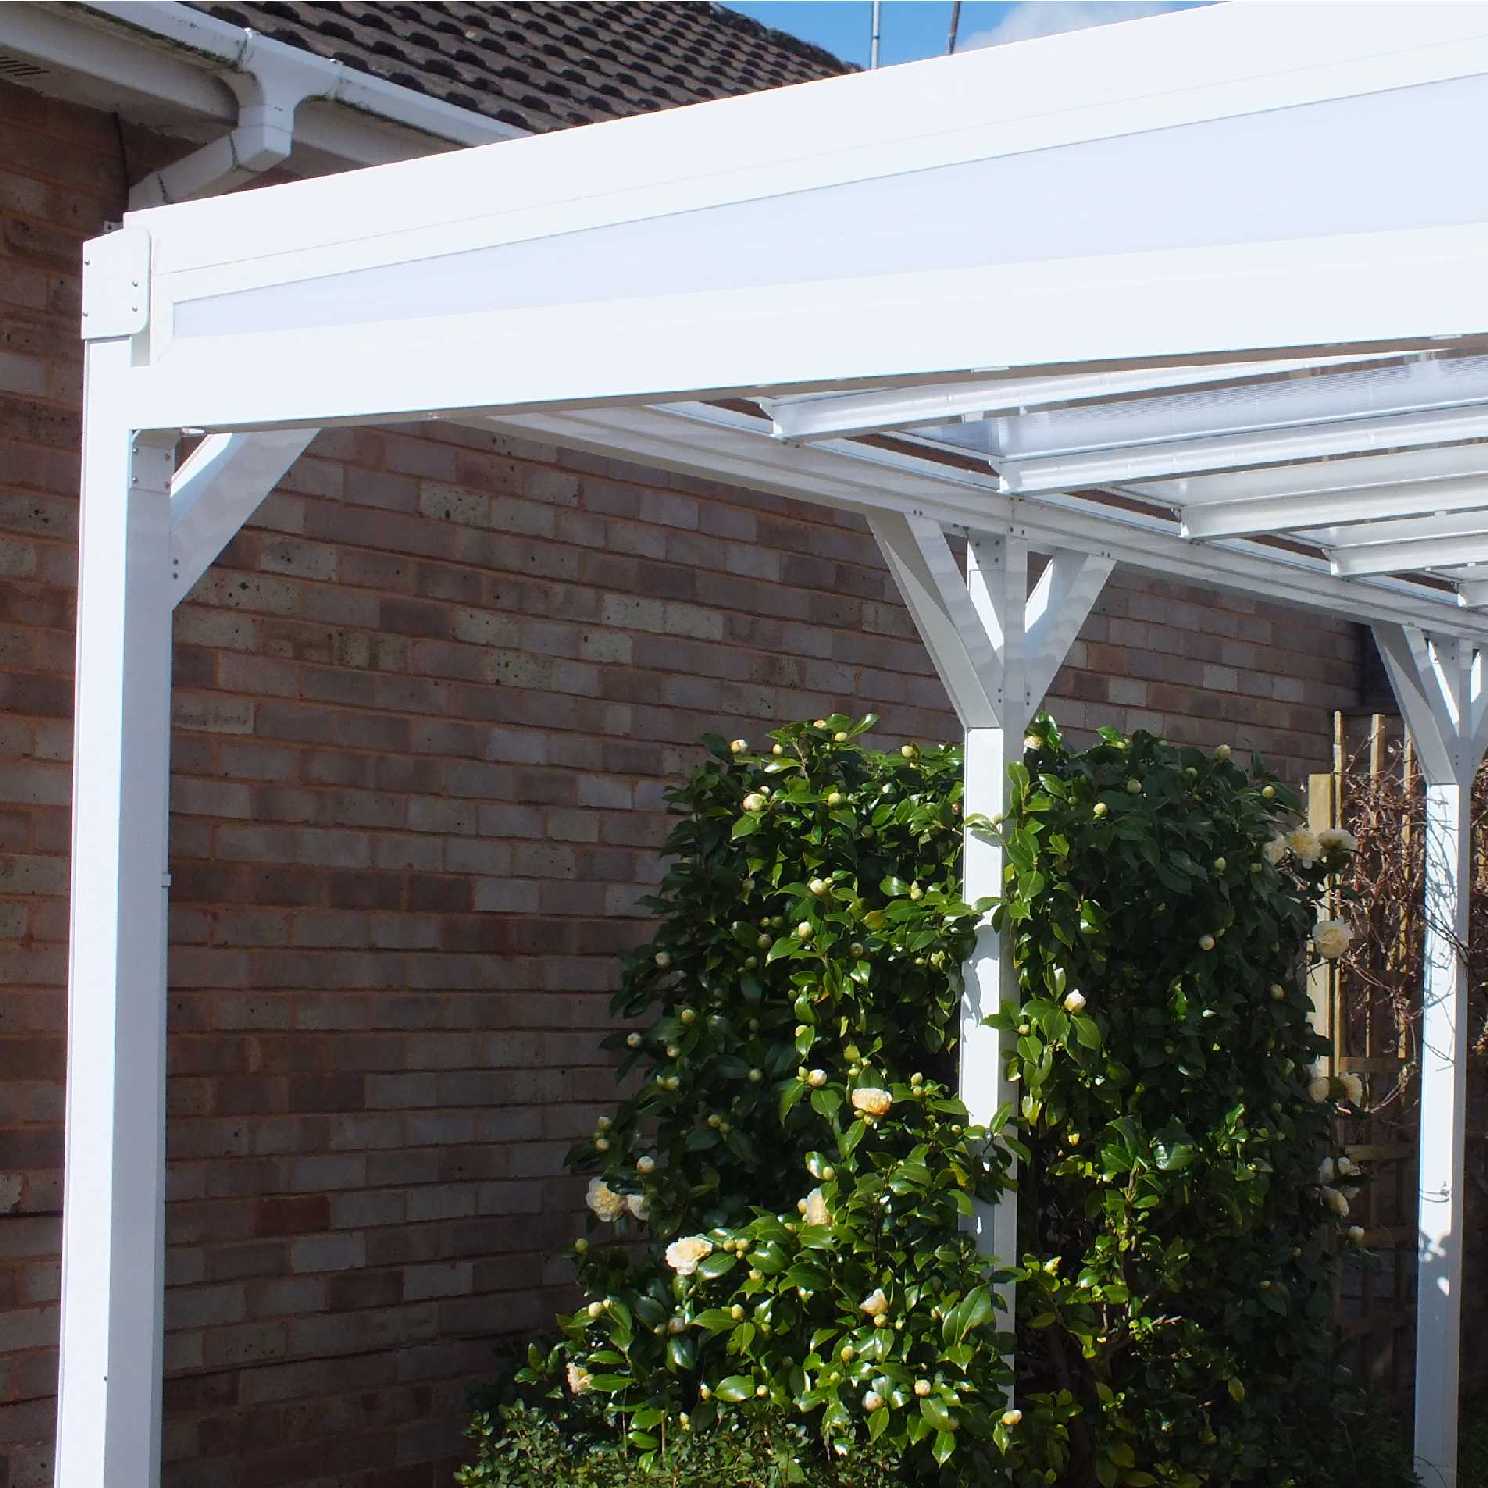 Omega SmartLean-To Canopy, White with 16mm Polycarbonate Glazing - 9.5m (W) x 2.0m (P), (5) Supporting Posts from Omega Build